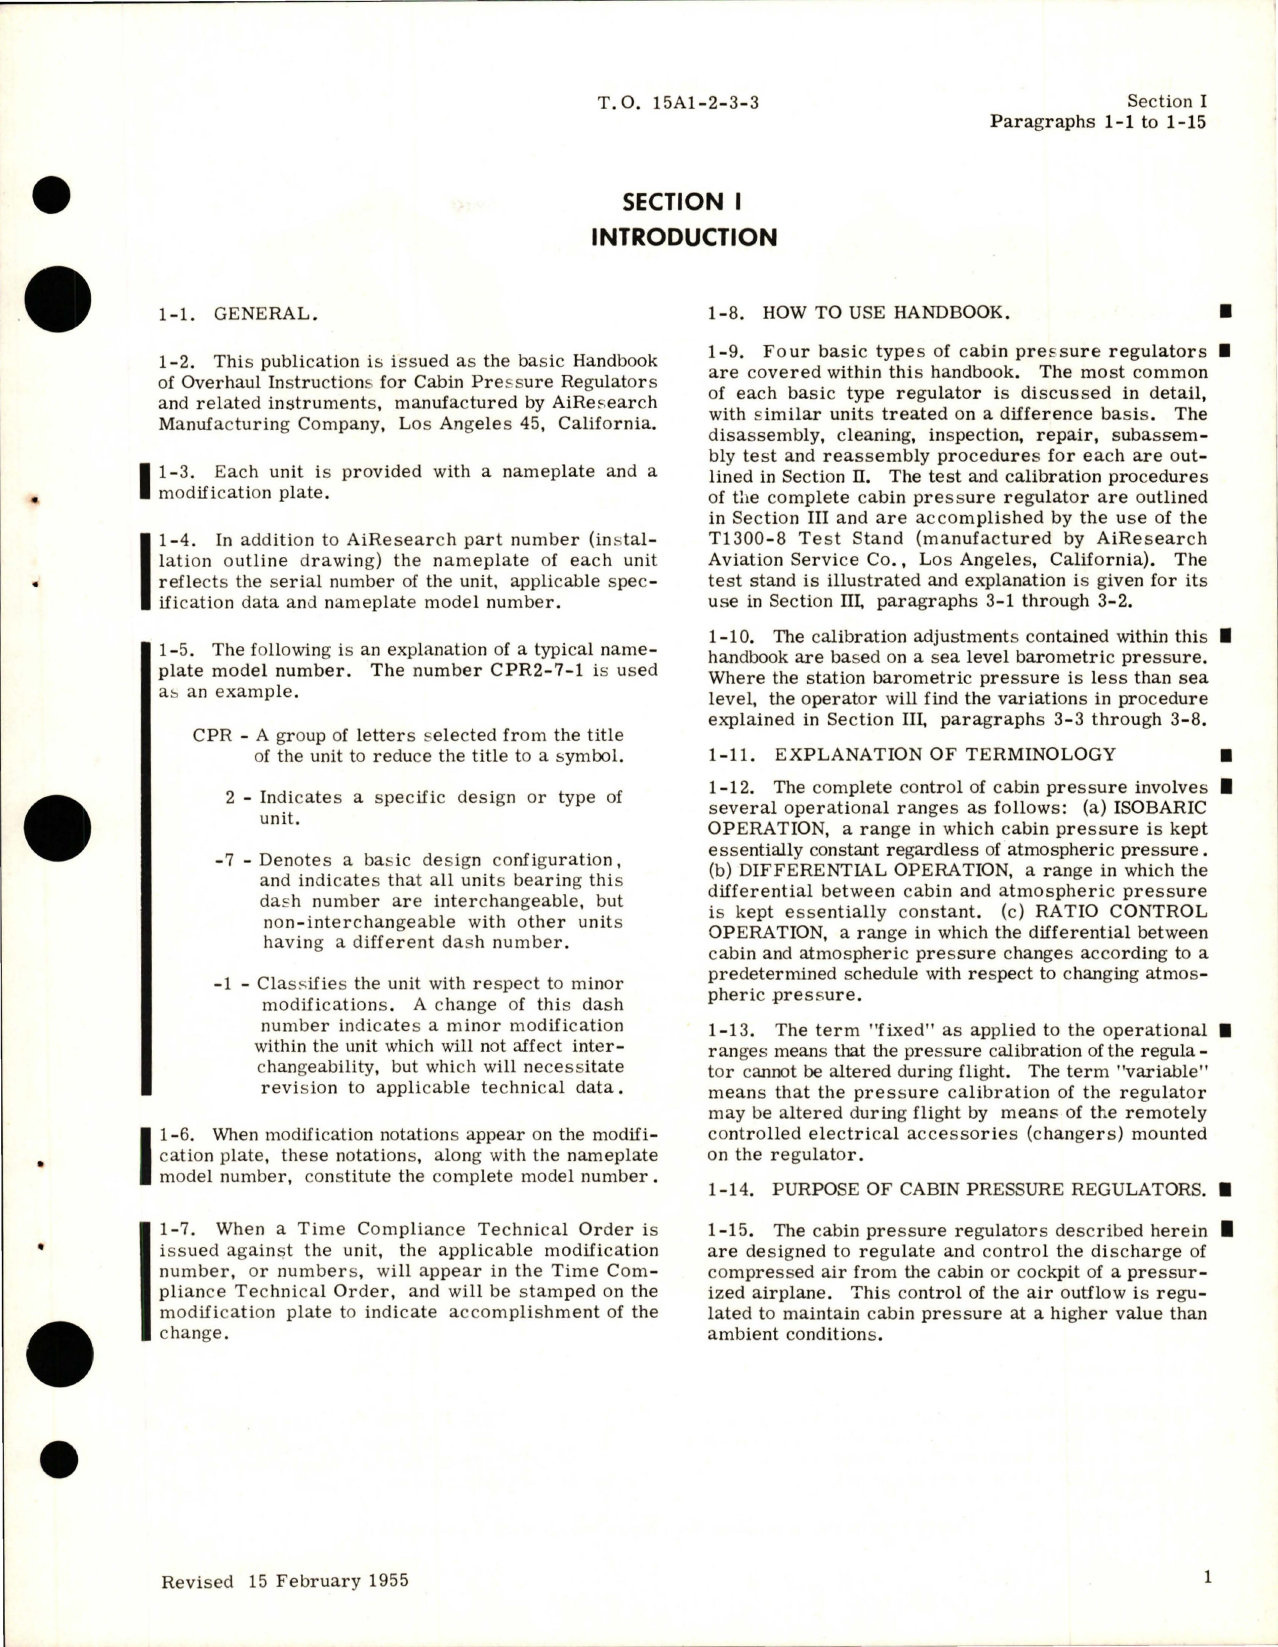 Sample page 9 from AirCorps Library document: Overhaul Instructions for Cabin Pressure Regulators